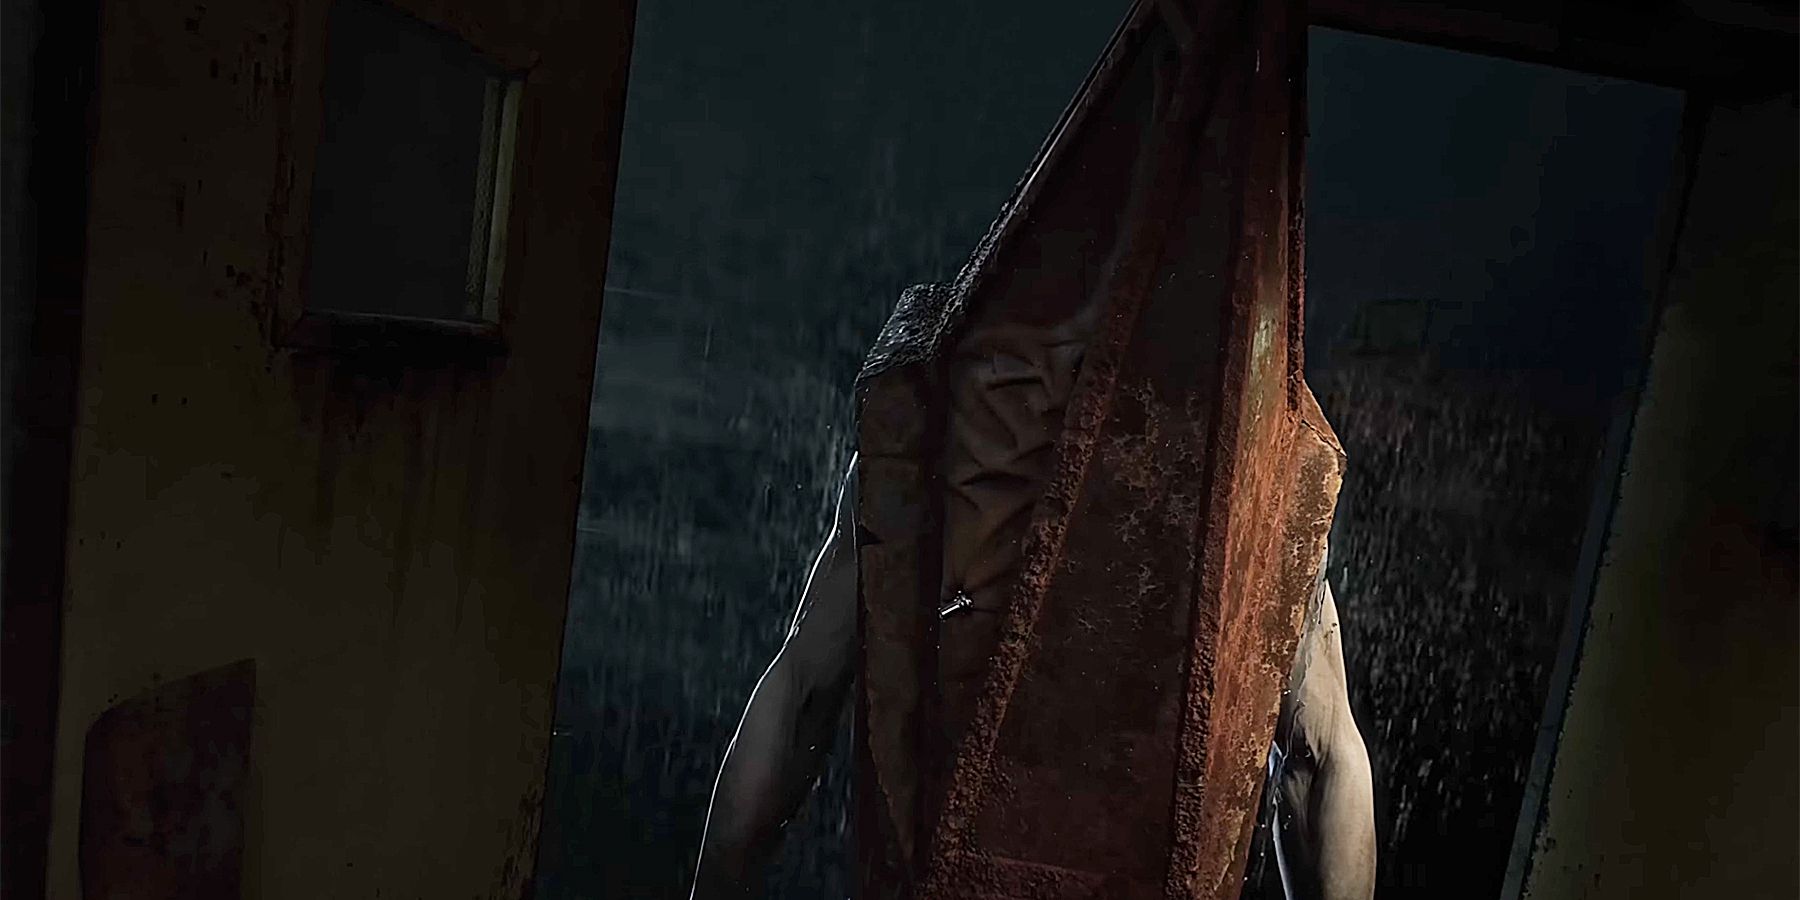 Silent Hill 2 Remake Leak Has Fans of Pyramid Head Excited